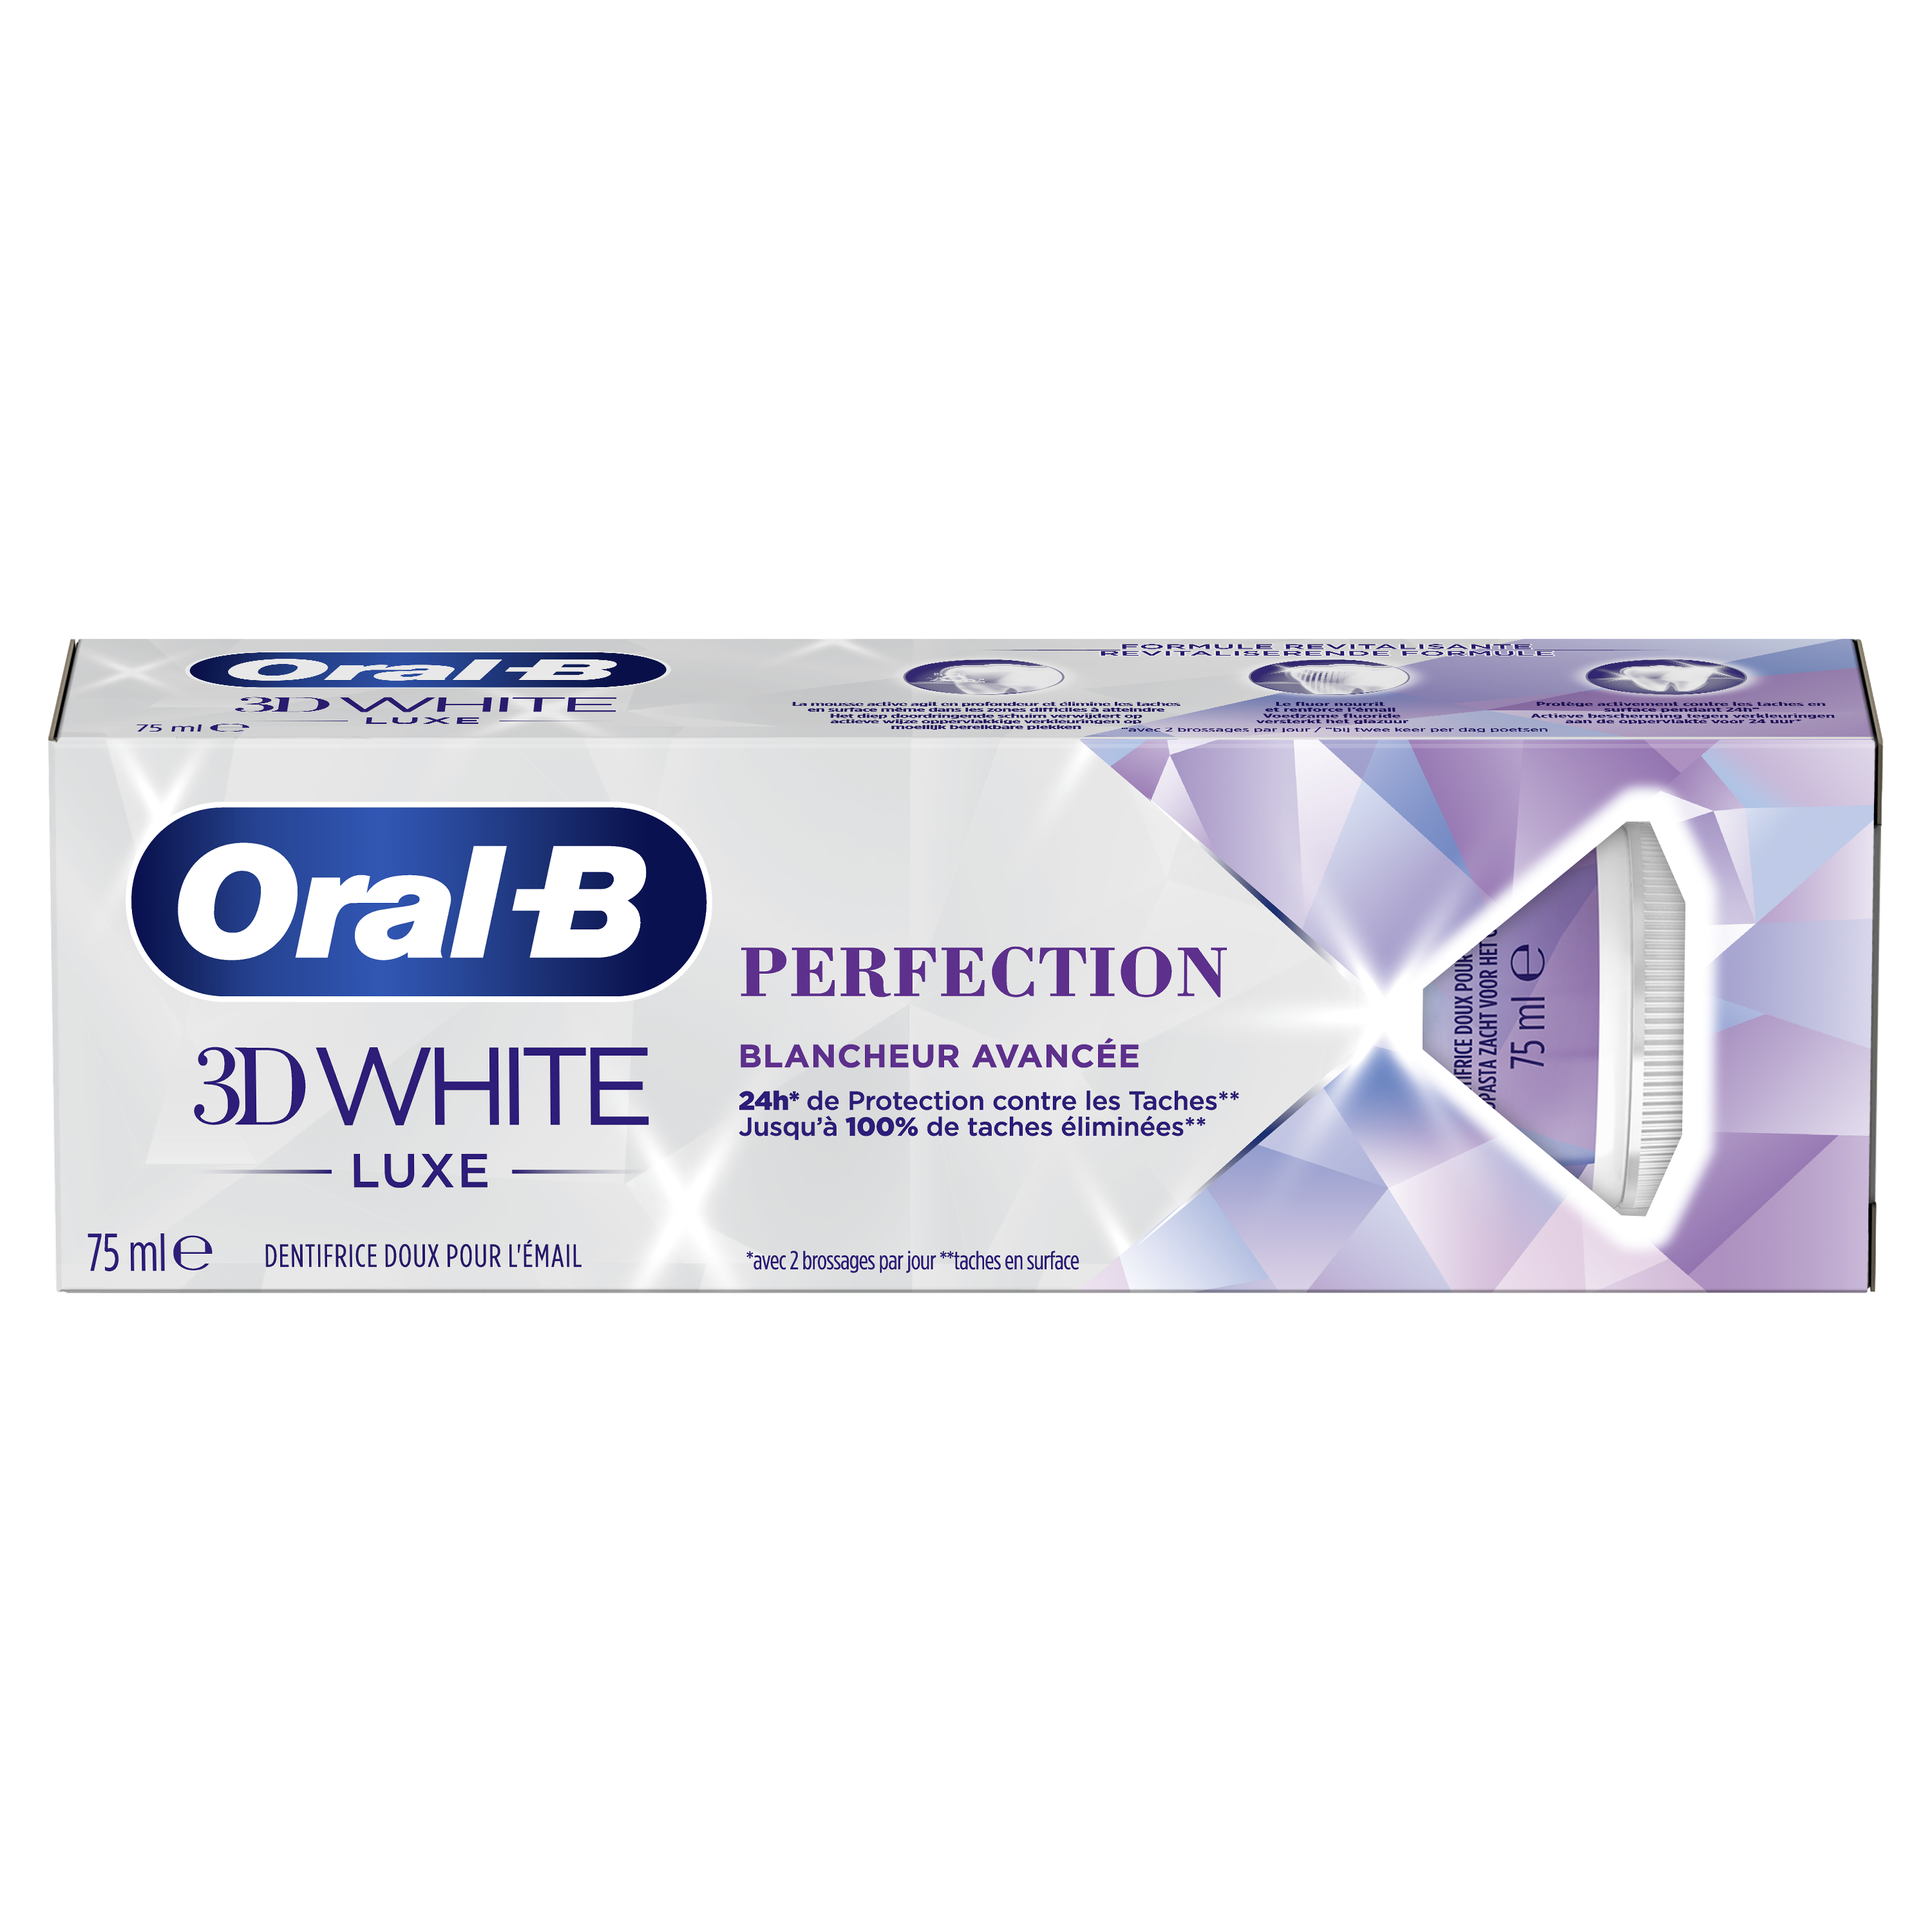 Interessant Opwekking Matig Oral-B 3D White Luxe Perfection Tandpasta | Oral-B